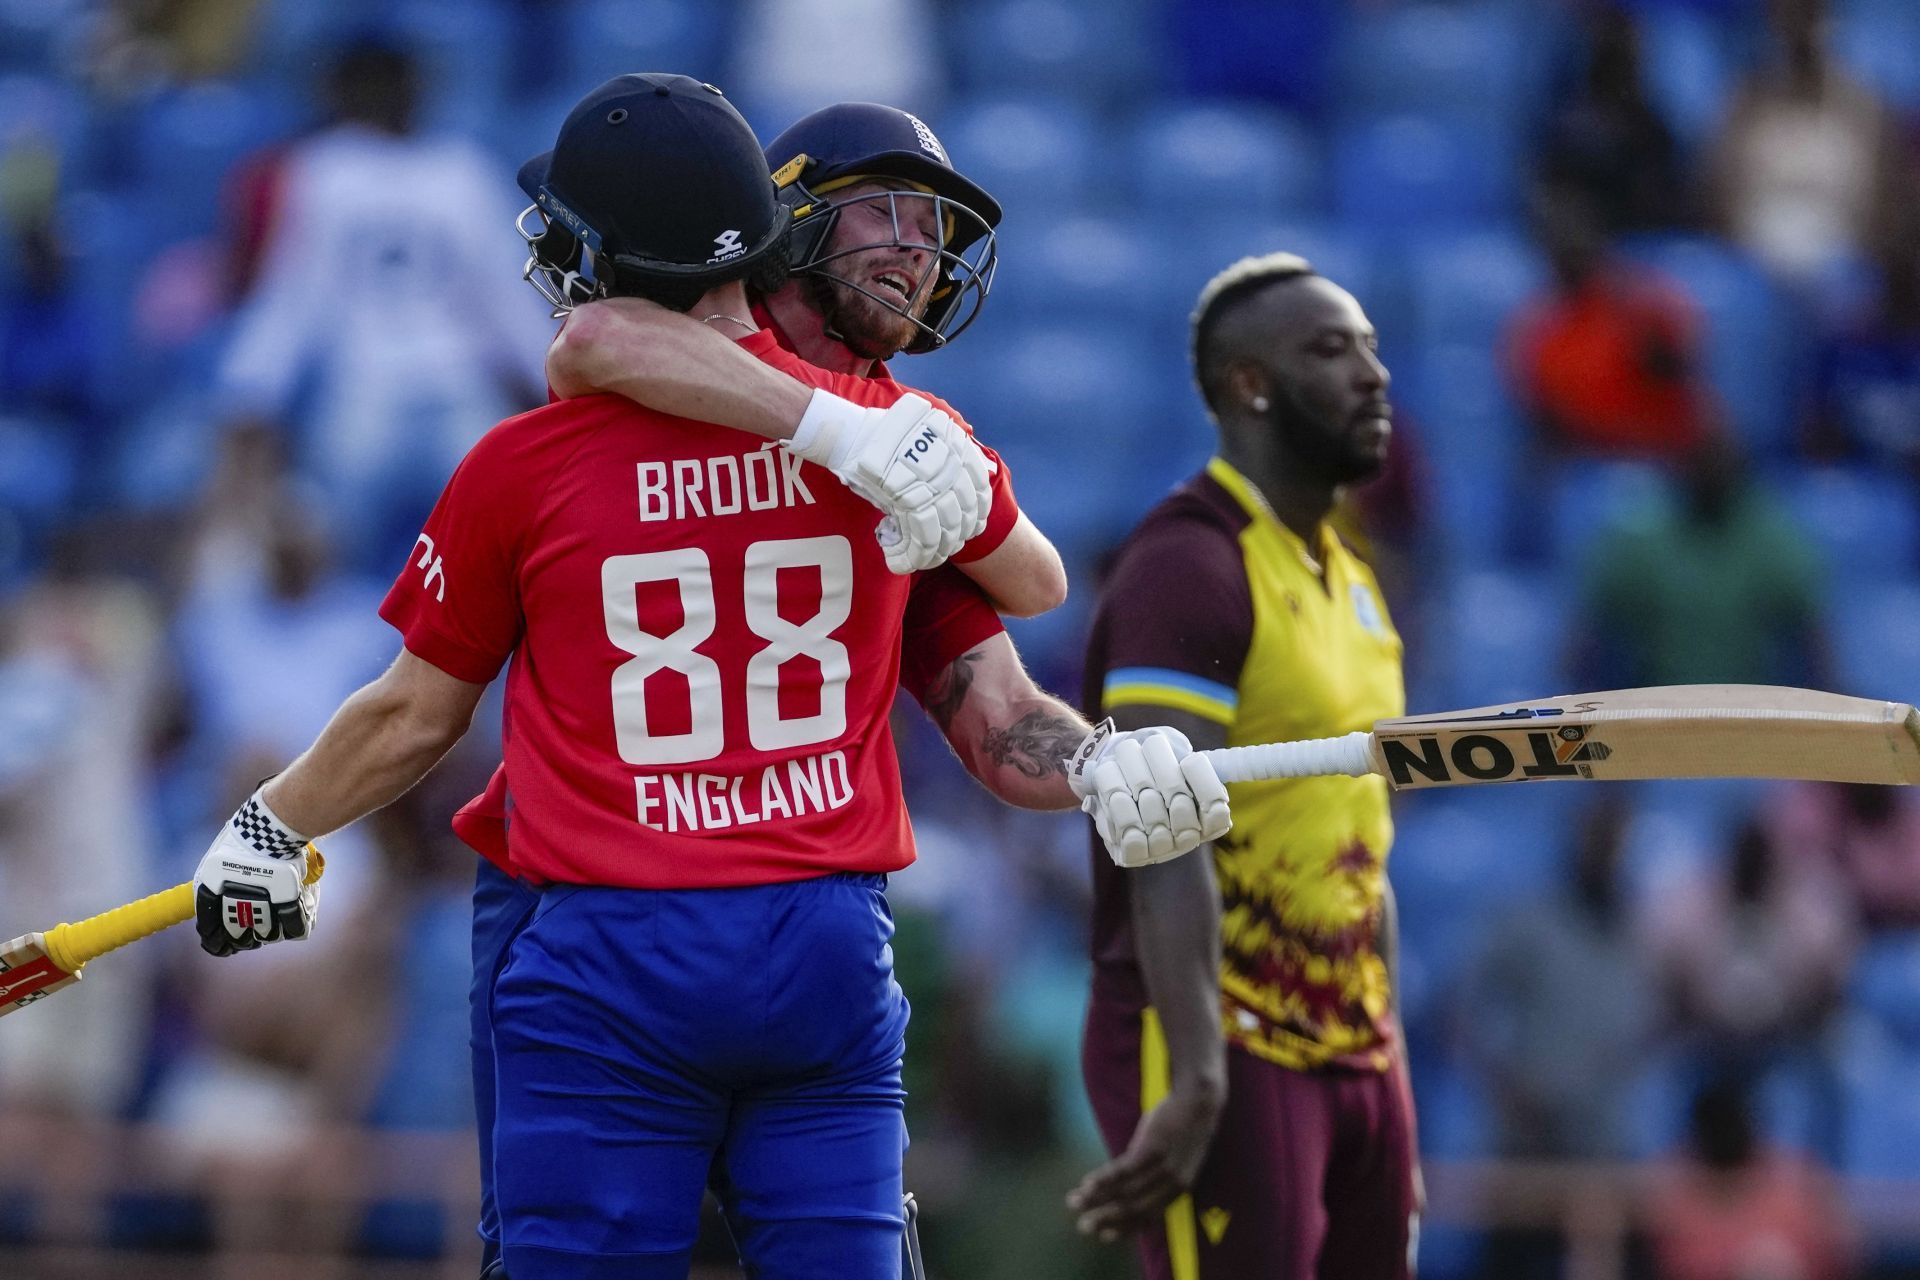 Harry Brook played a sizzling cameo for England recently